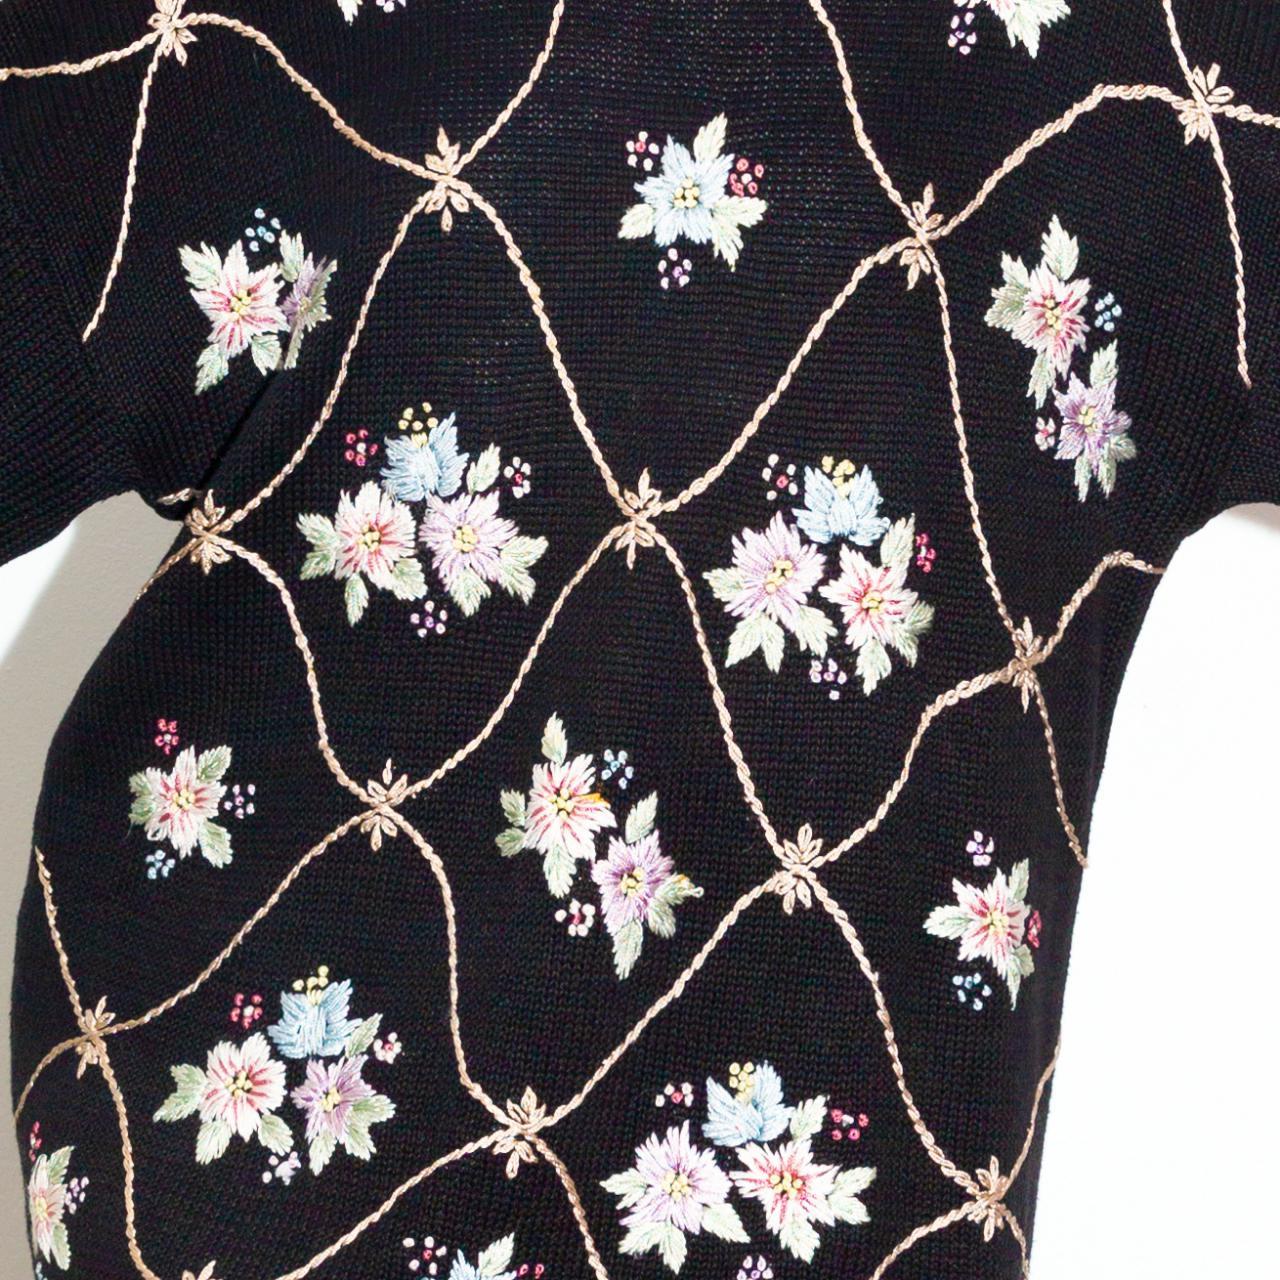 Product Image 4 - The most darling knit black